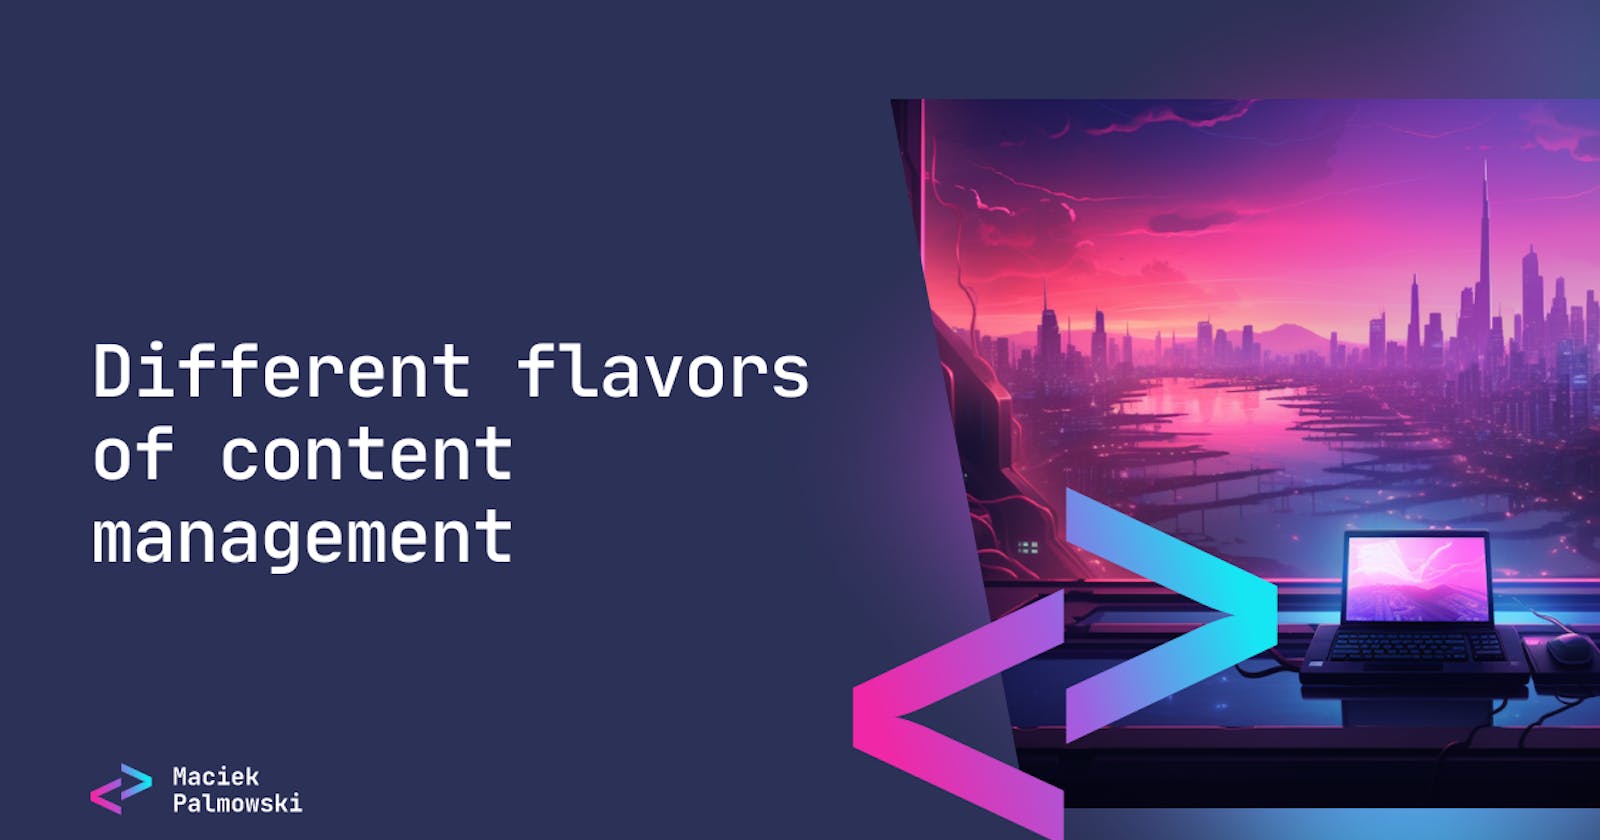 Different flavors of content management